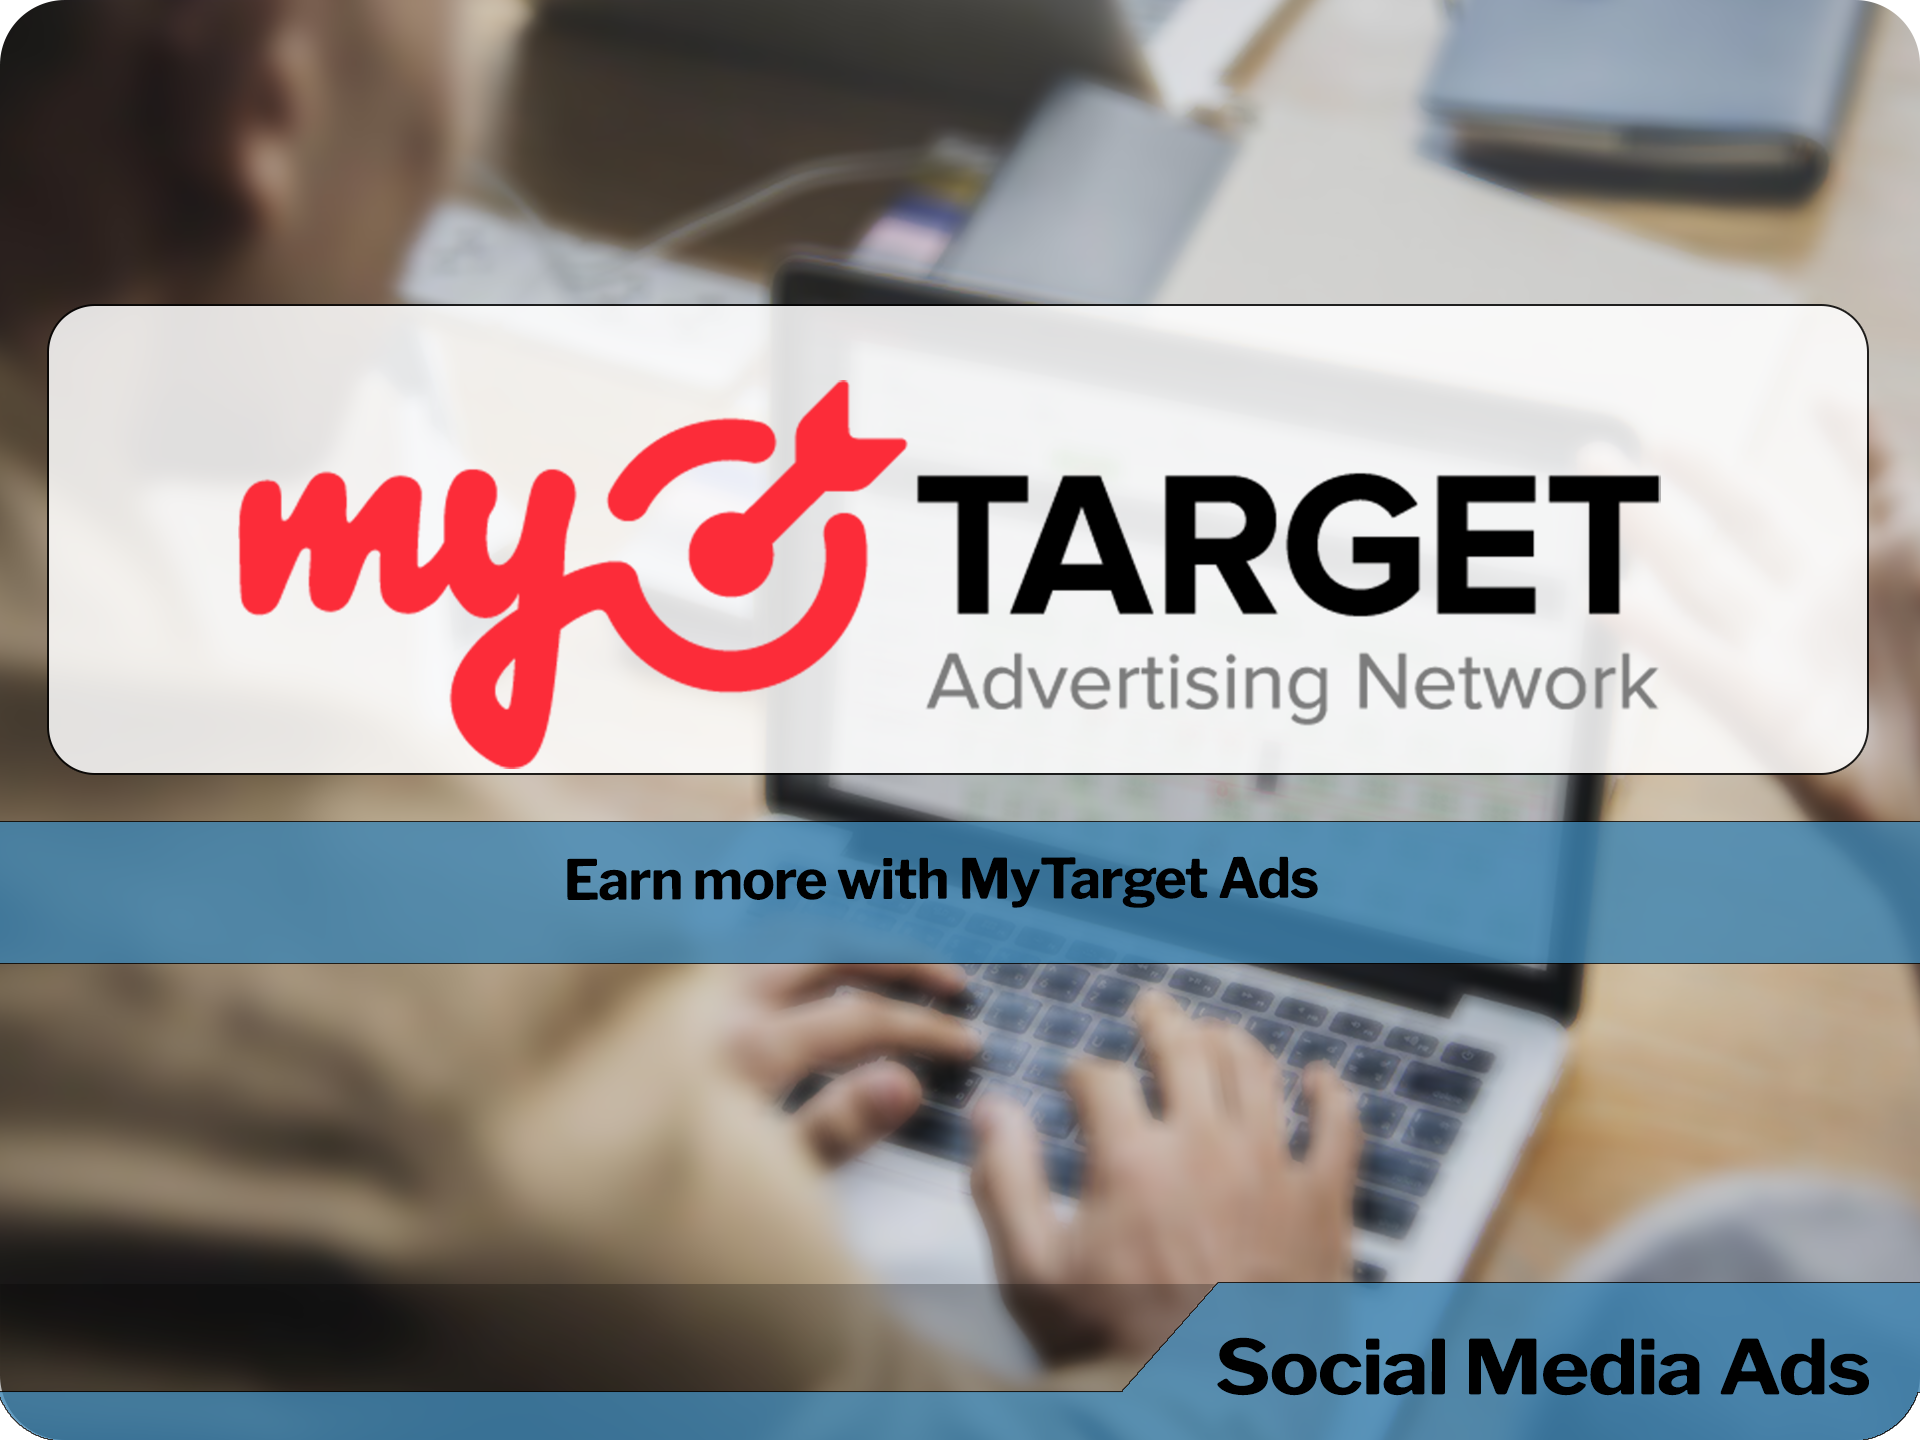 MyTarget ad network helps publishers increase ad revenue